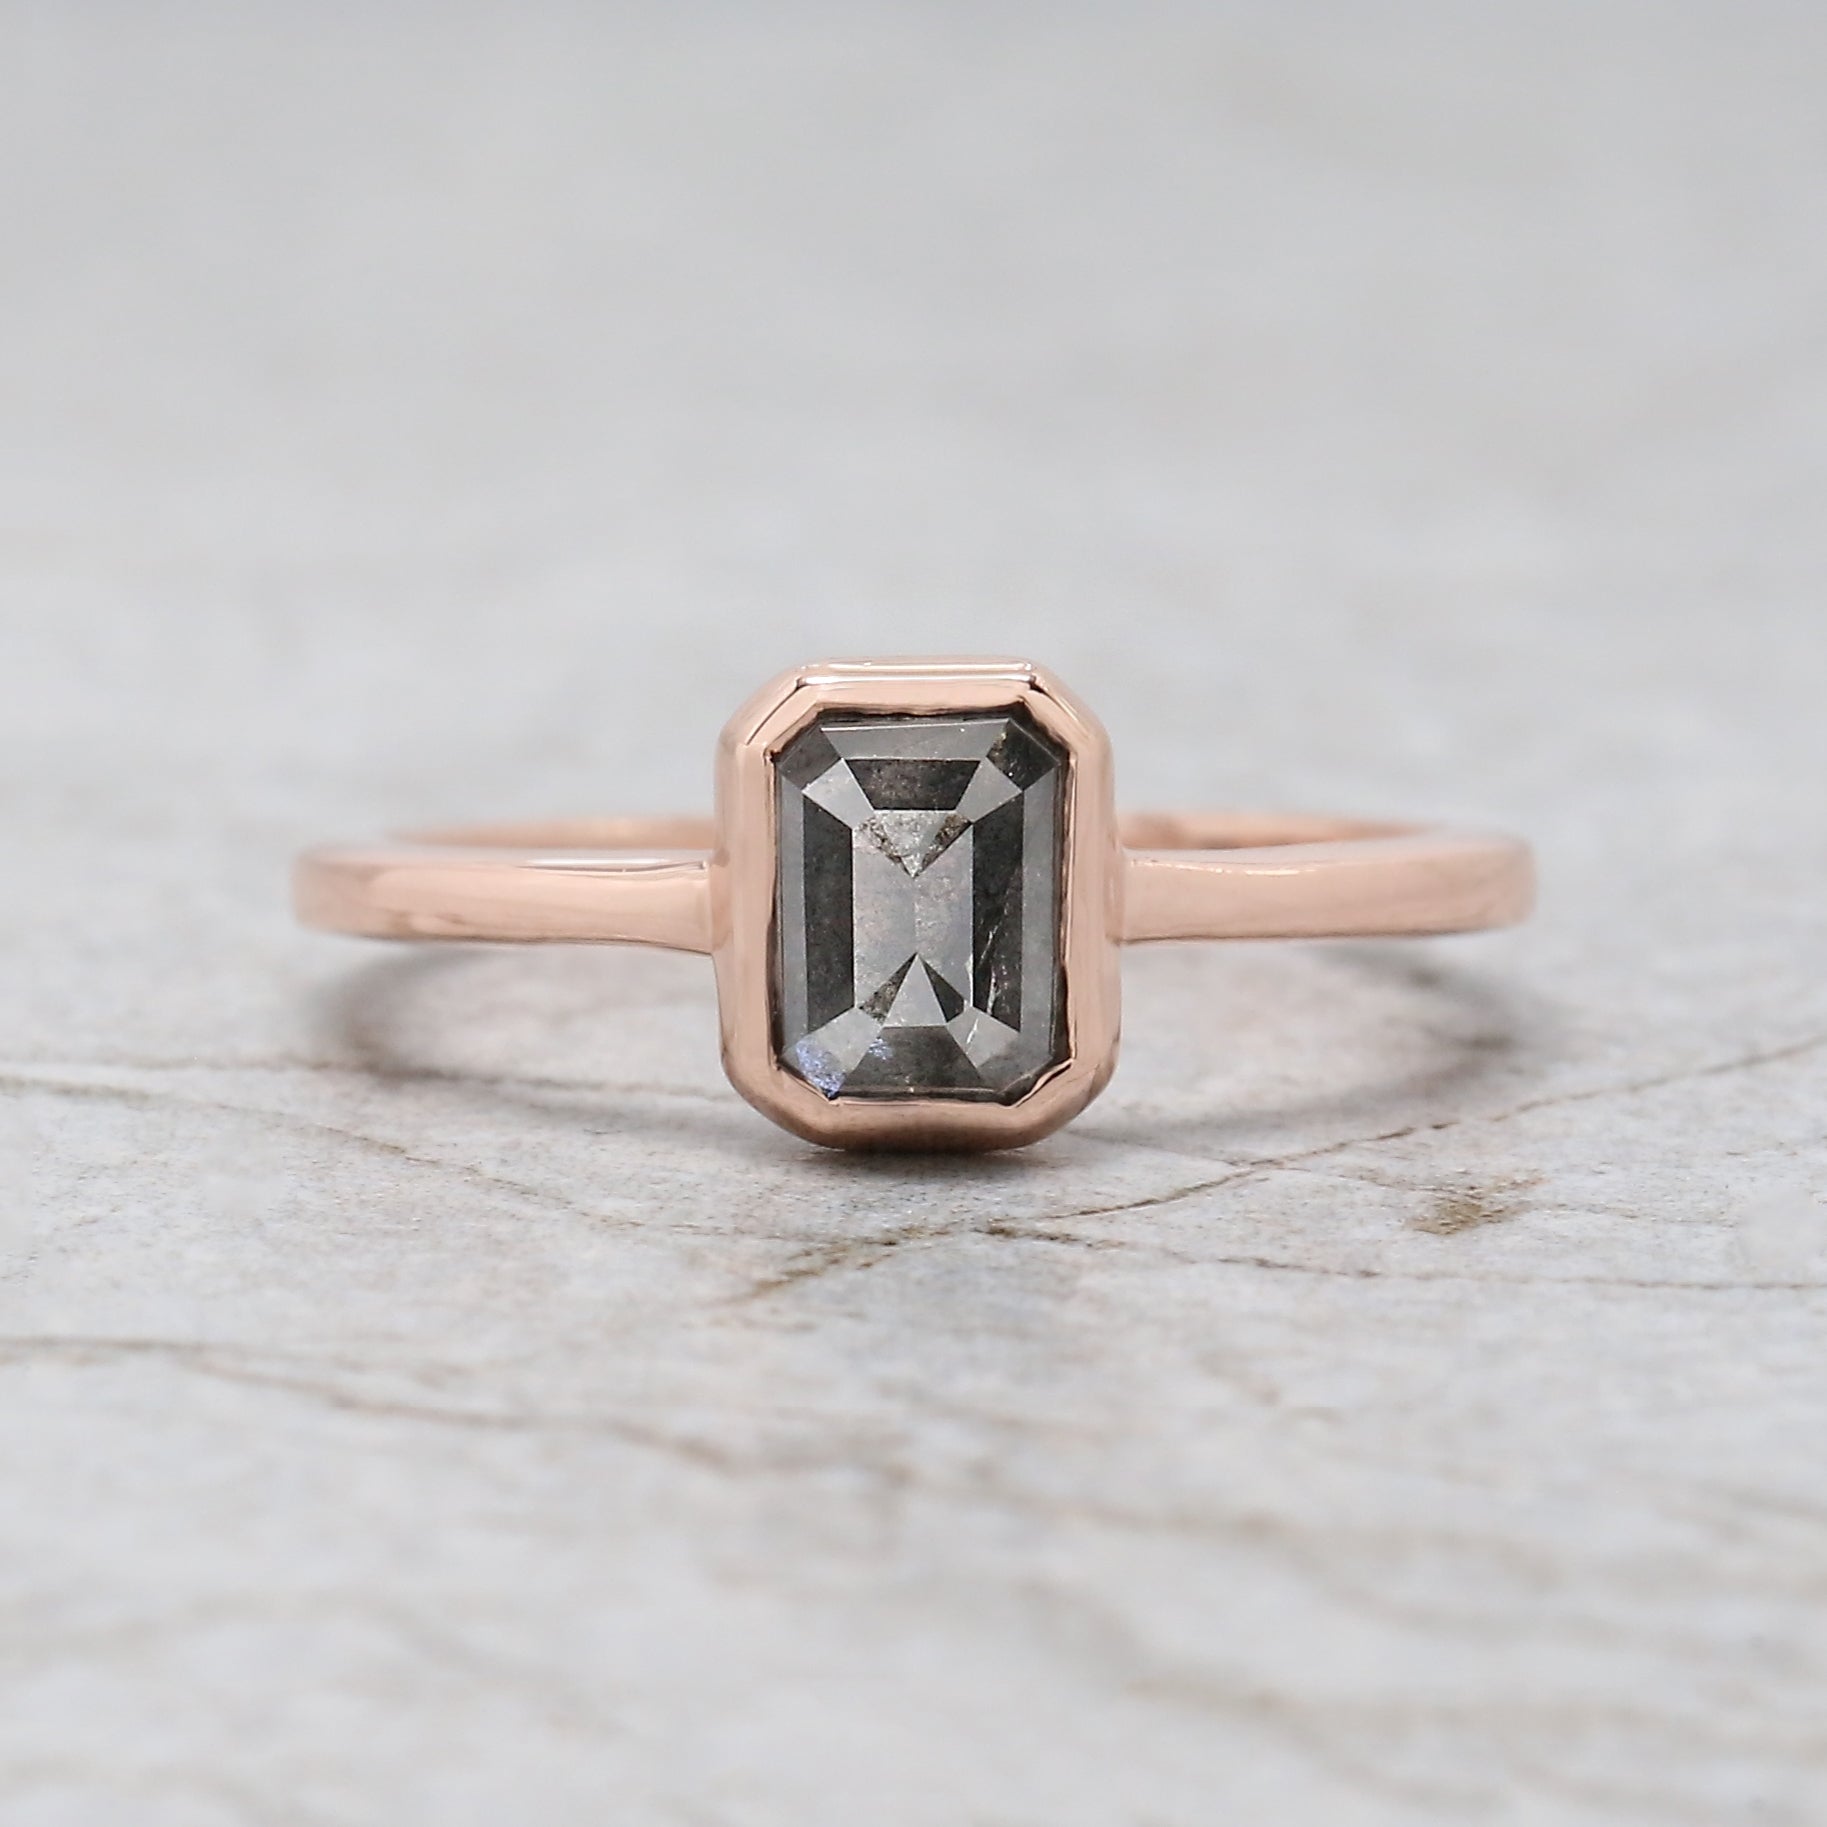 Emerald Cut Salt And Pepper Diamond Ring 1.11 Ct 6.30 MM Emerald Diamond Ring 14K Solid Rose Gold Silver Engagement Ring Gift For Her QL944